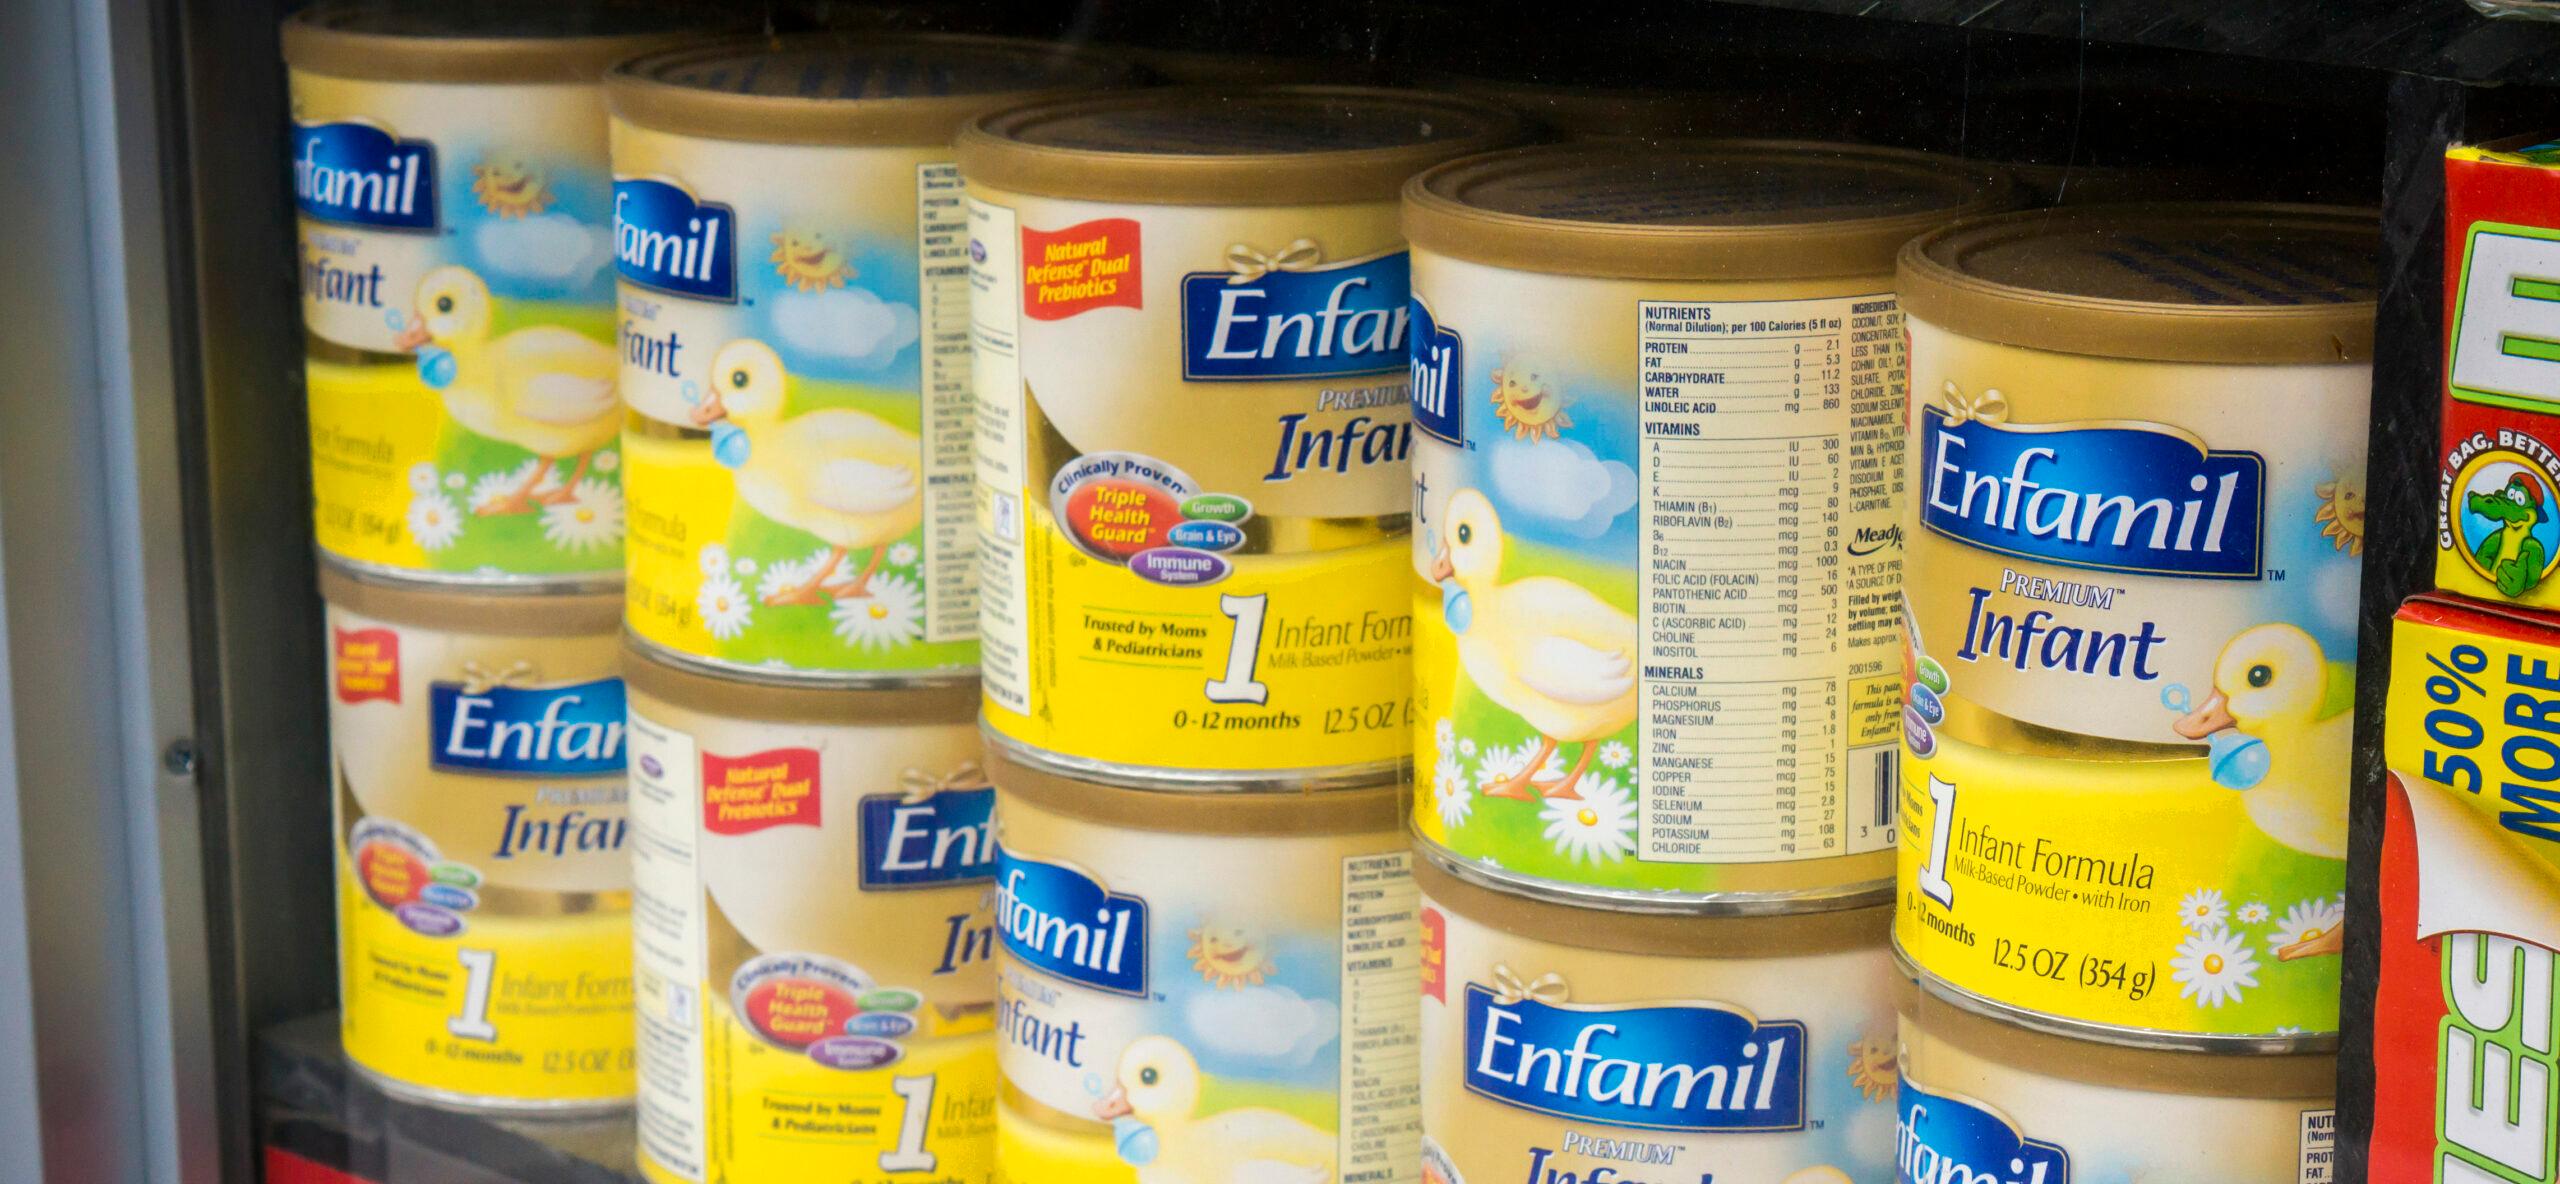 Containers of Enfamil Infant Formula are seen in the window of a grocery store in New York on Sunday, June 16, 2013. The nationwide shortage of baby formula is stressing out parents.